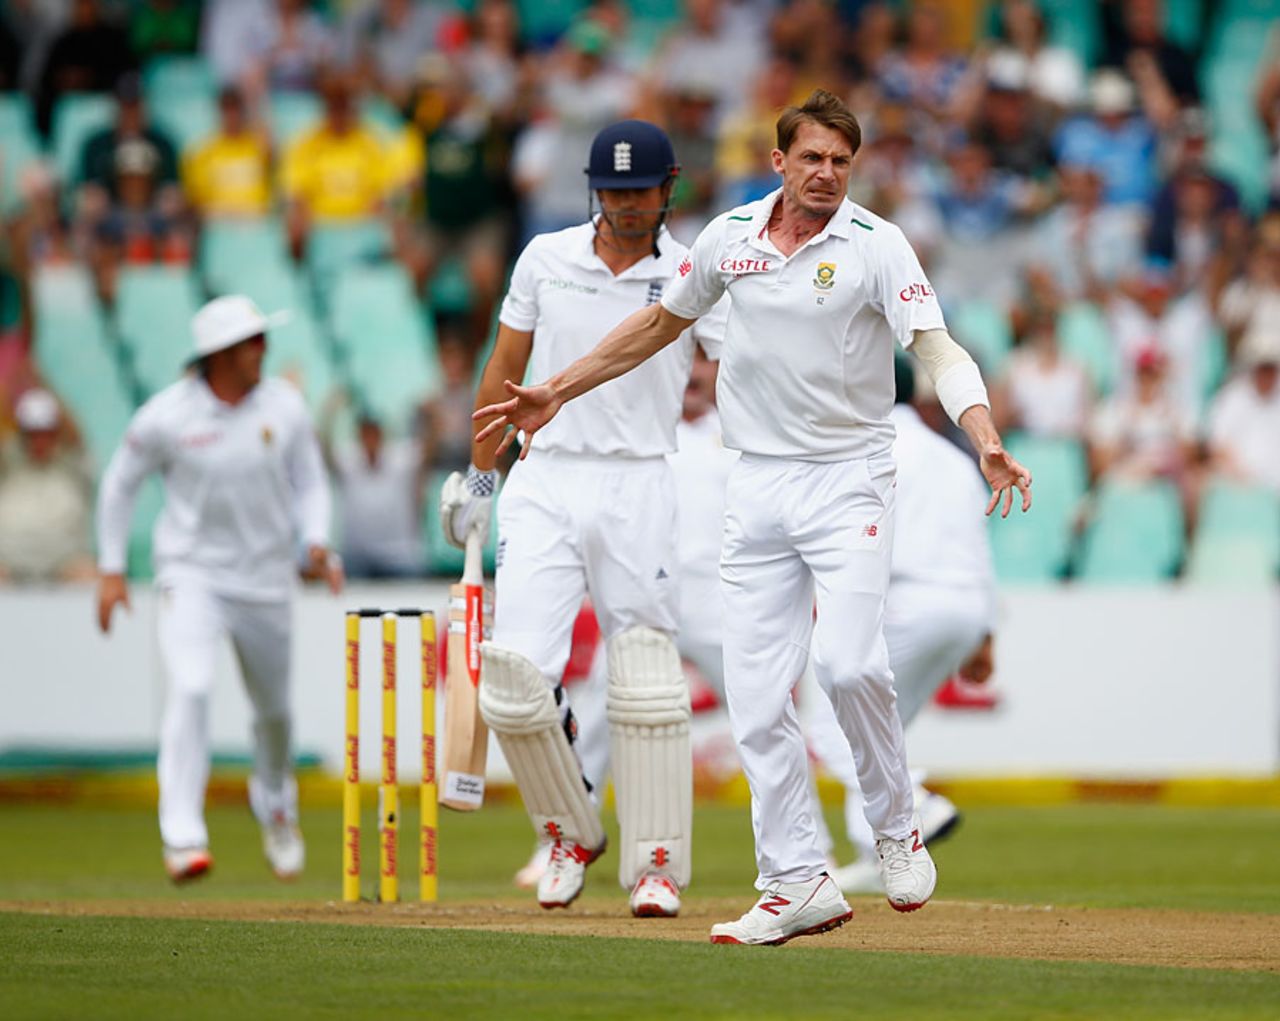 Dale Steyn made an immediate mark on his return from injury, South Africa v England, 1st Test, Durban, 1st day, December 26, 2015